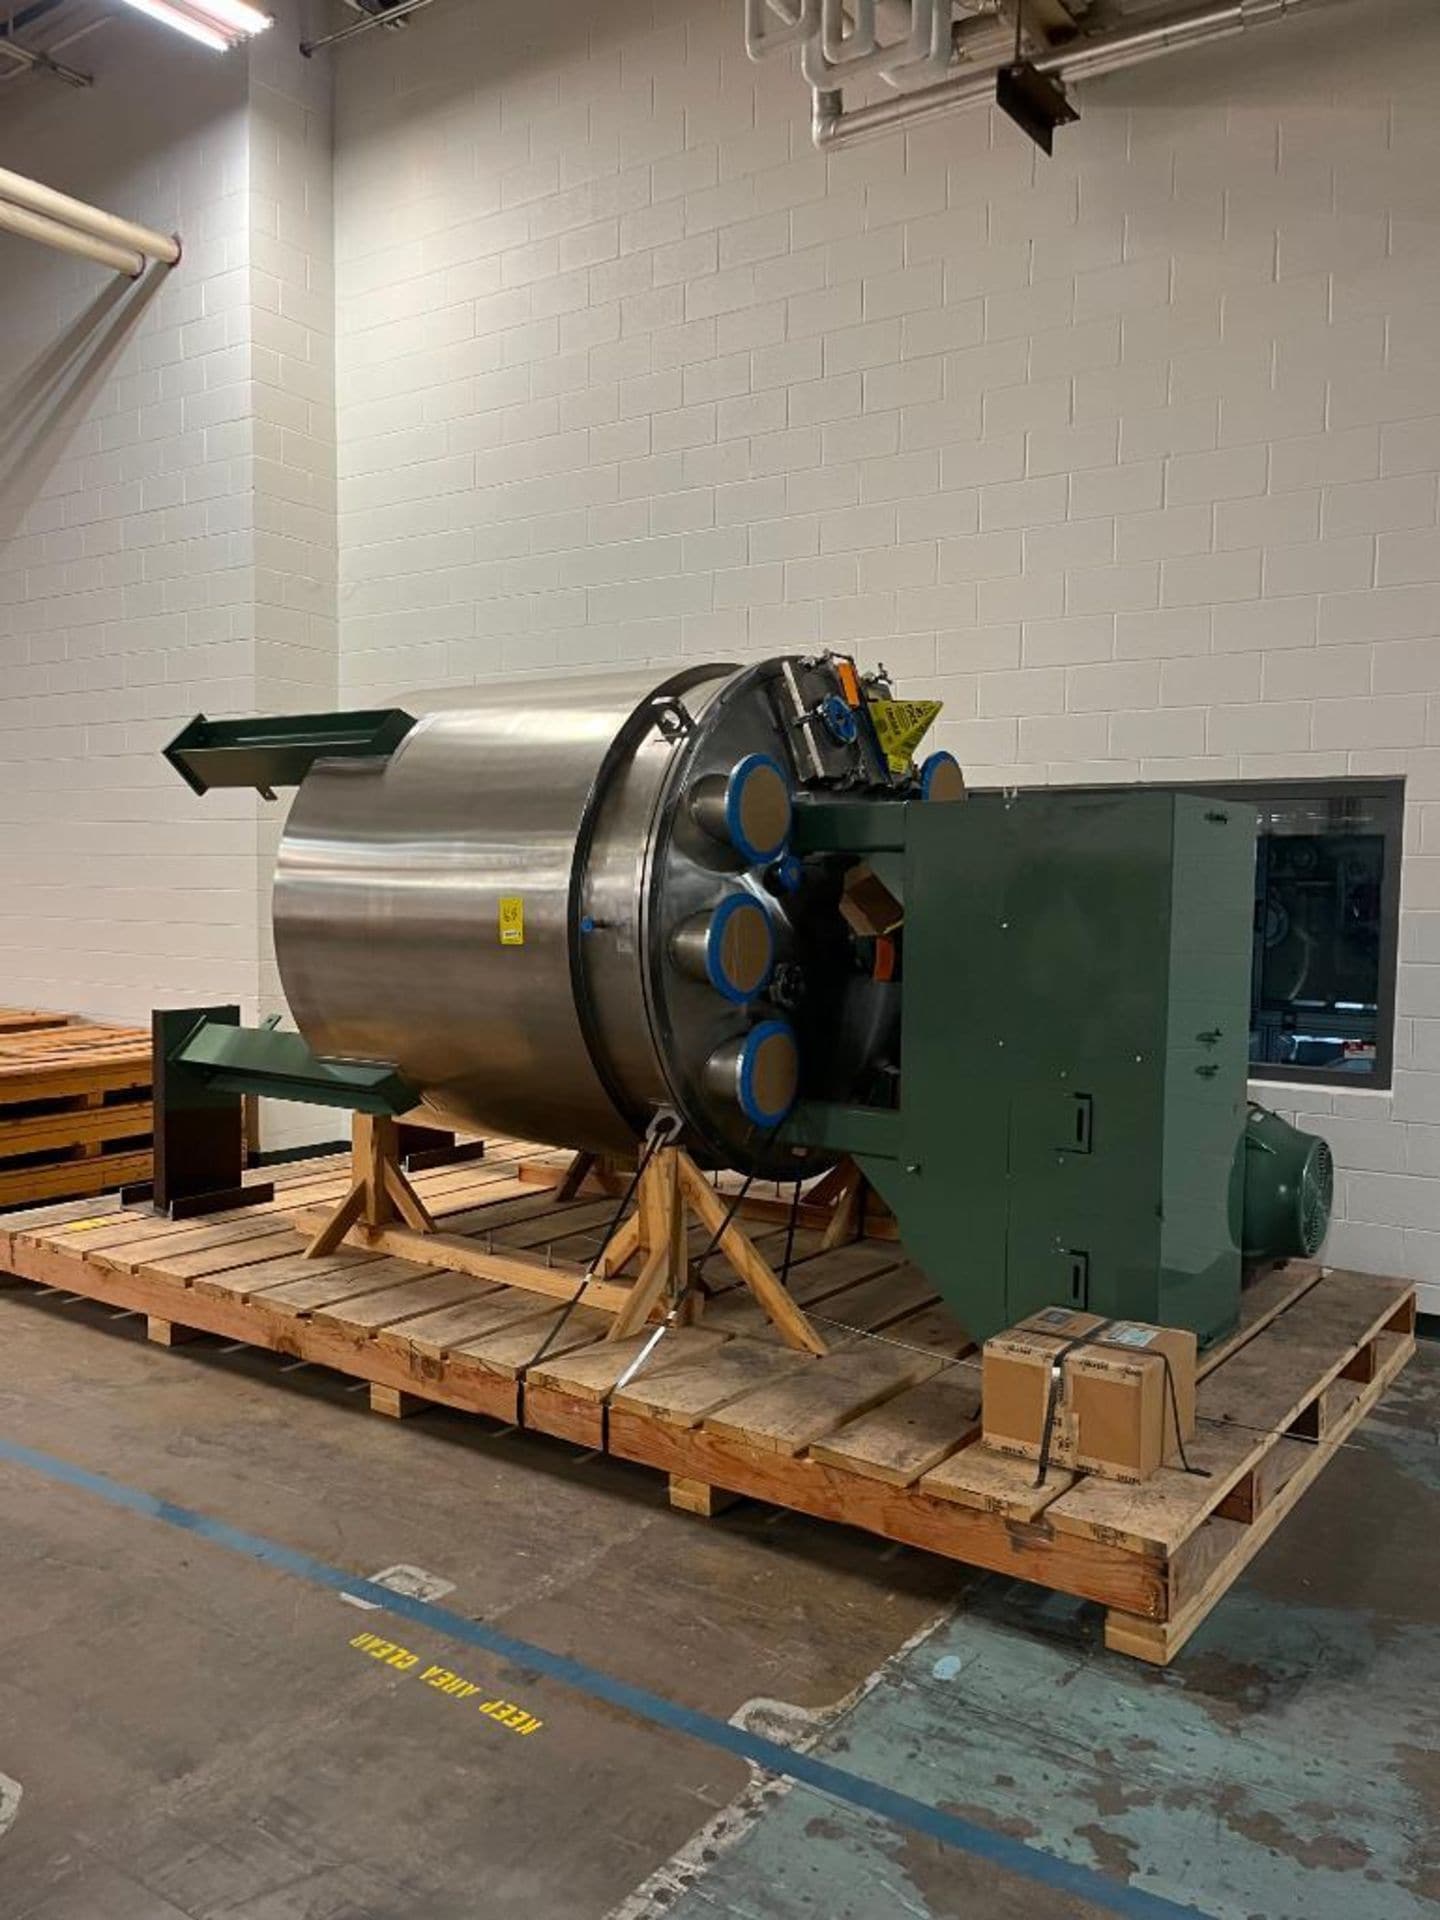 2019 myers mixers double wall stainless steel mixing tank 125hp royal welding and fabrication tank